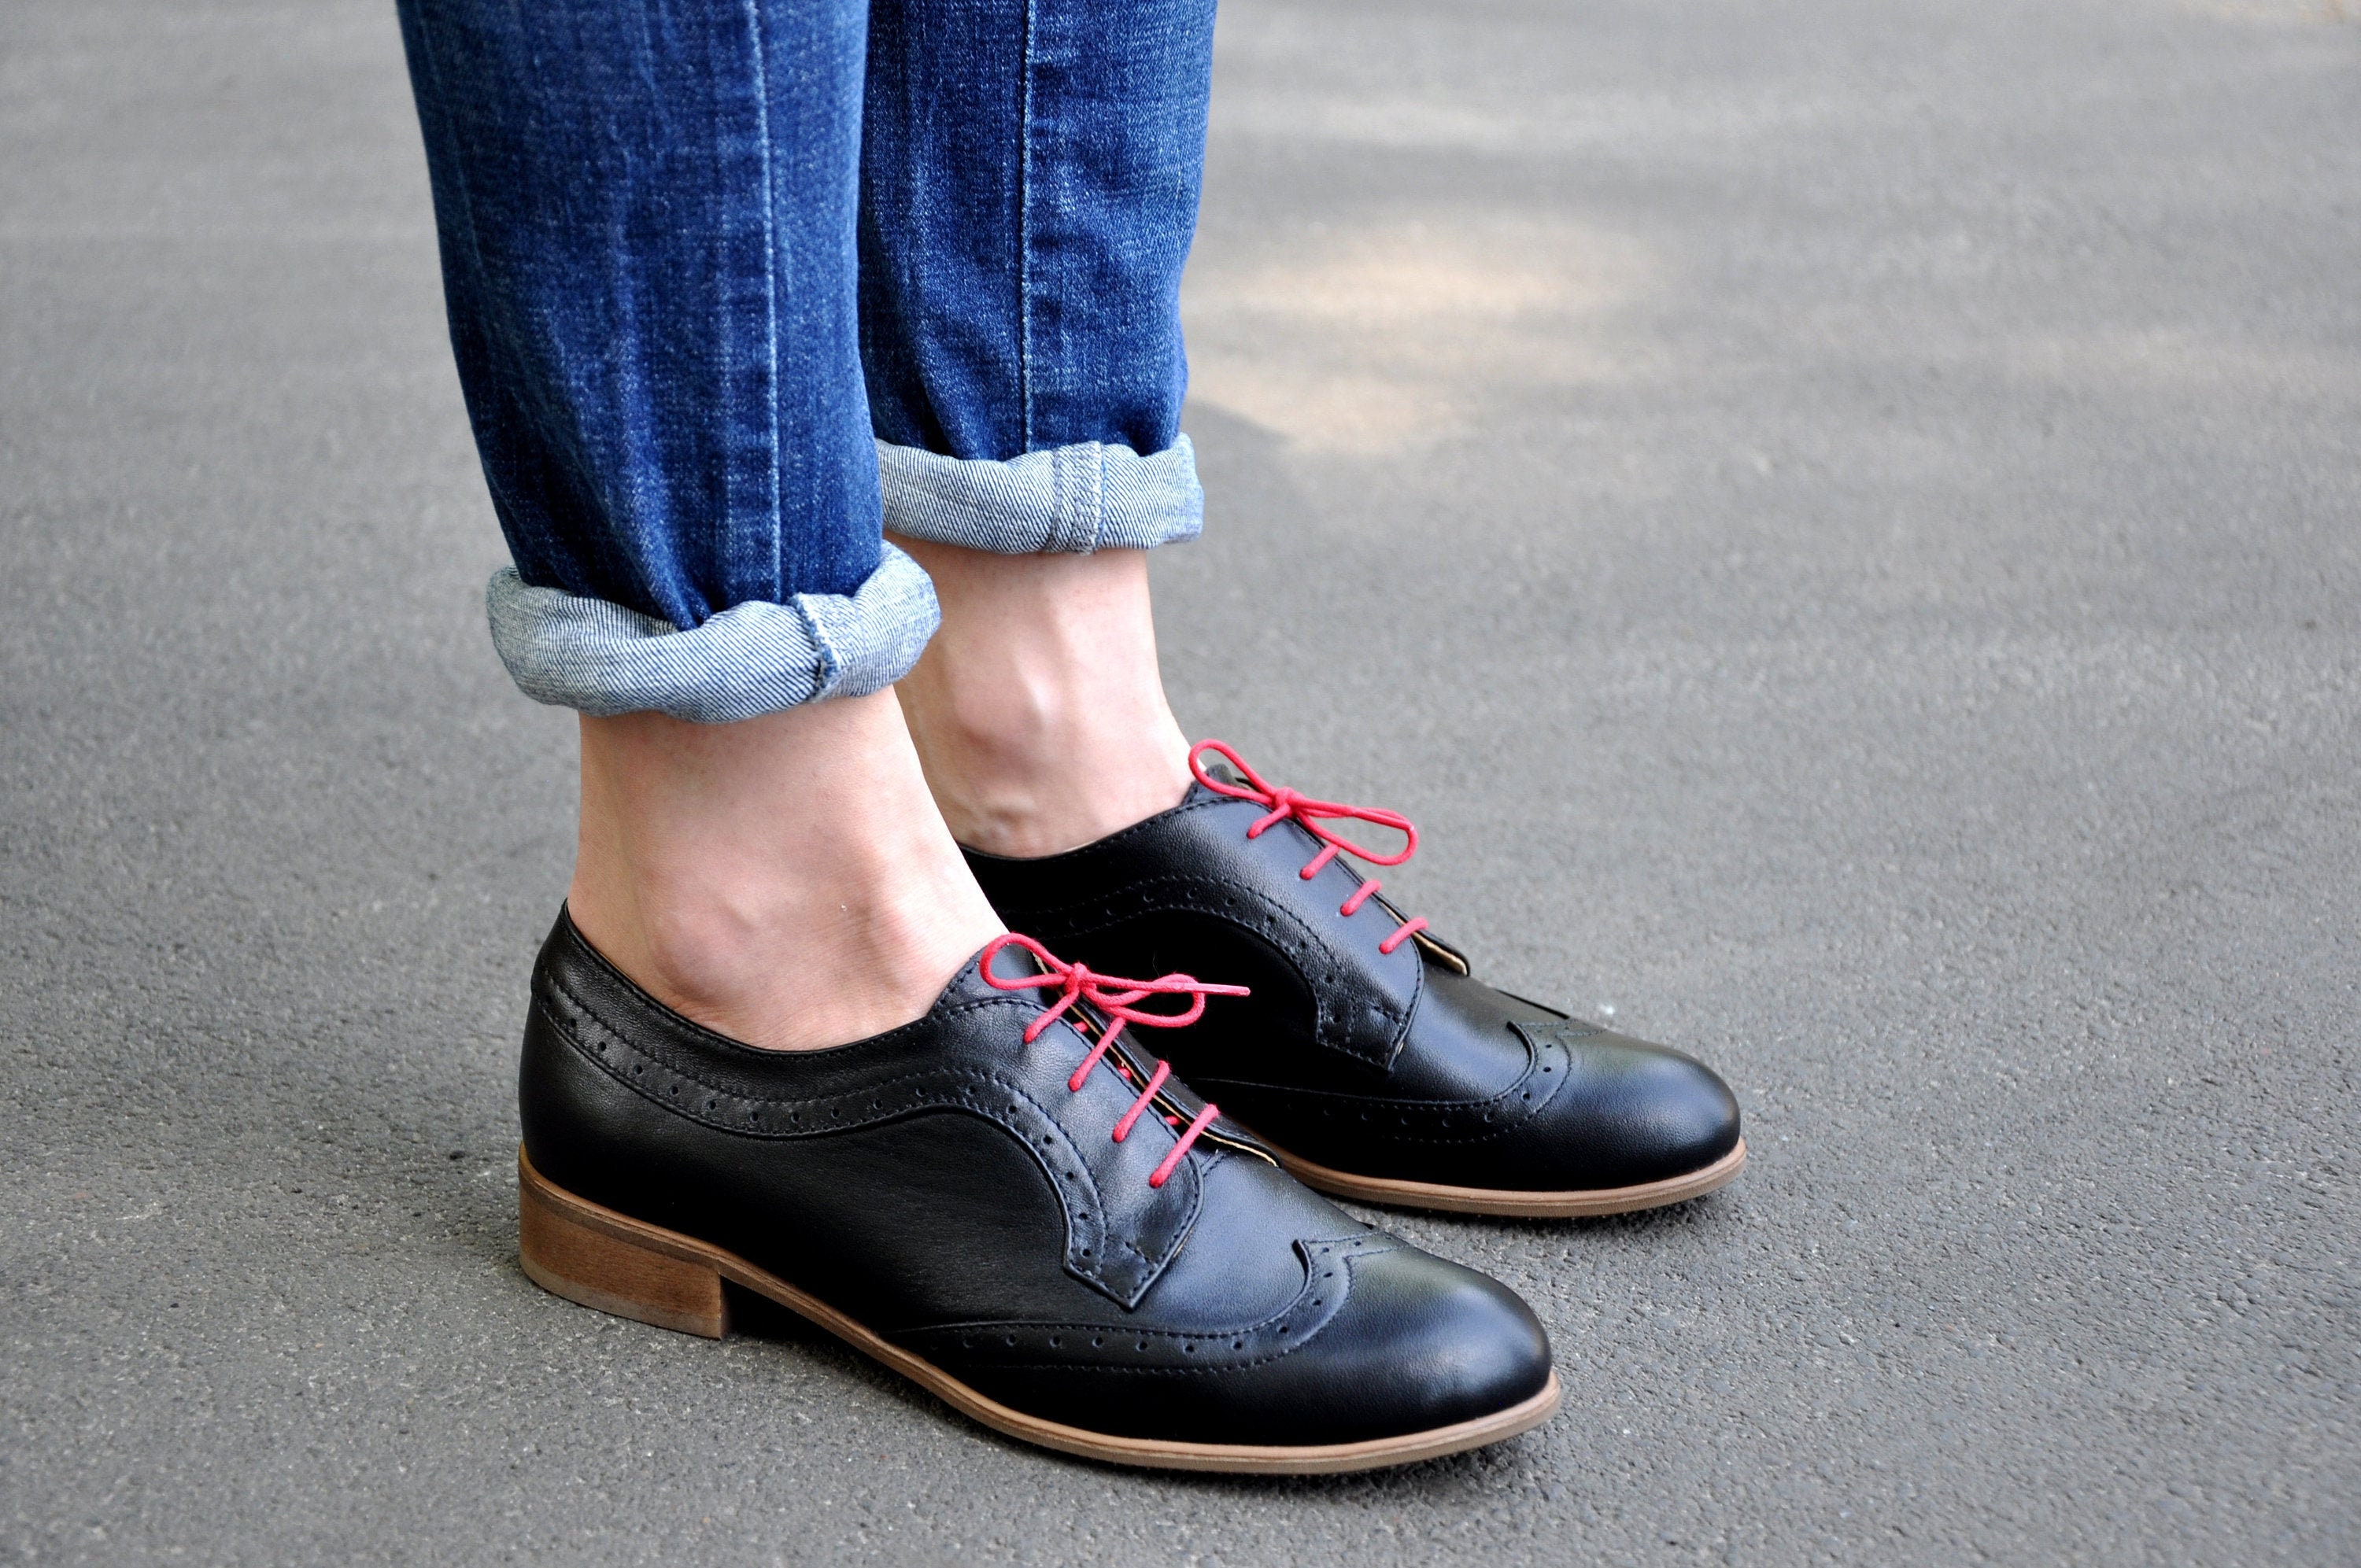 Derby Shoes Outfits For Women (45 ideas & outfits)